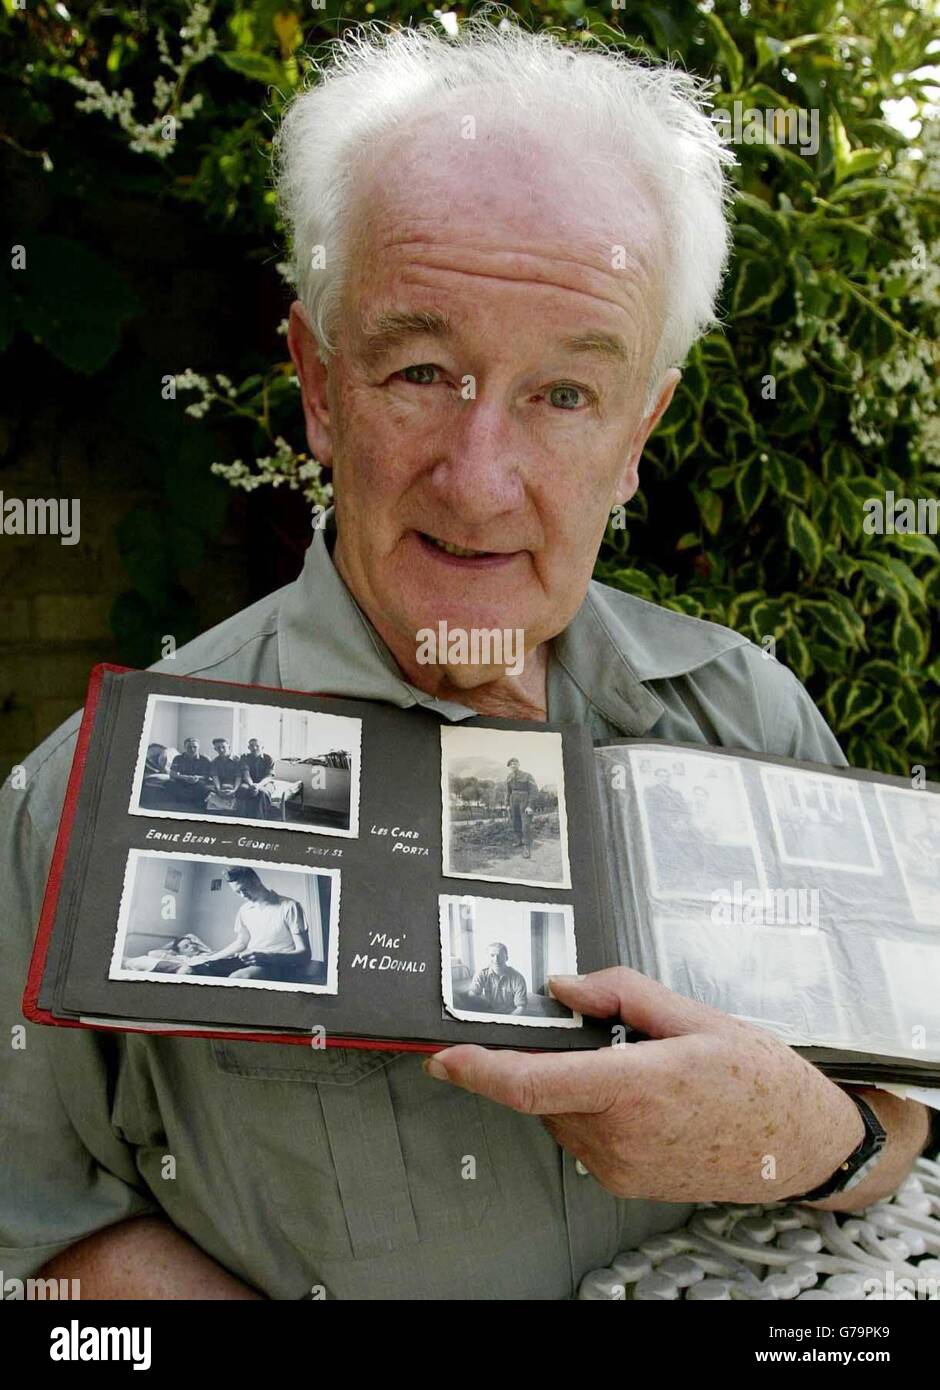 Harry Dillon, 71, from Biddenden, near Ashford, Kent, looks through his photograph album of his time during National Service in Germany in the early 1950s. A postman managed to reunite two ex-Army pals when he delivered a letter addressed to Mr Adam Hastings, aged 70, somewhere in Newcastle upon Tyne. Harry Dillon had not seen his friend since they were demobbed in 1953. A Royal Mail employee in Newcastle went through the local phone book to trace Mr Hastings to the correct address in the Westerhope area of the city and the old soldiers have now talked on the phone to catch up on more than 50 Stock Photo